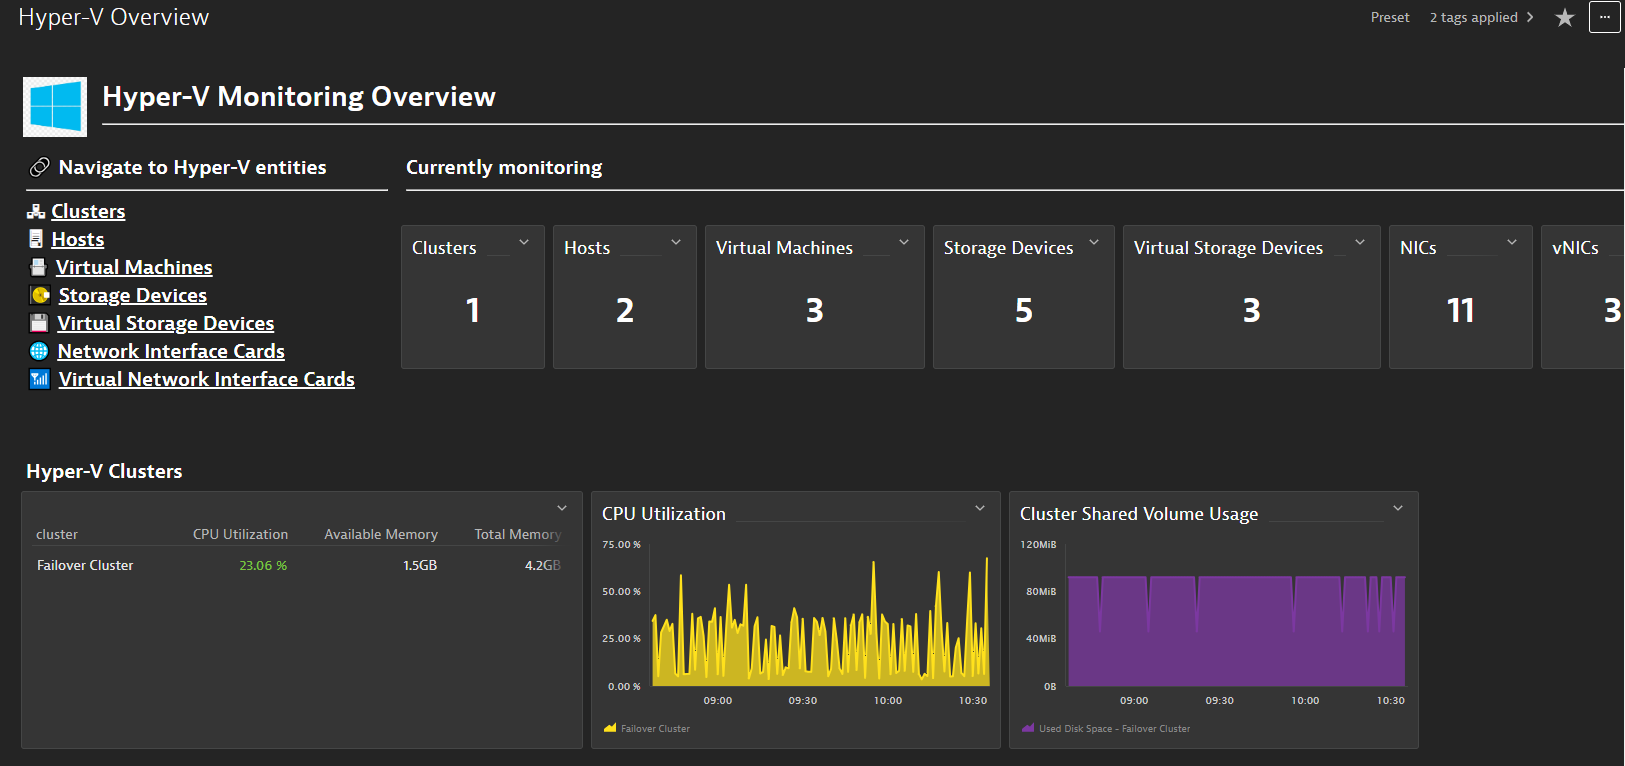 Hyper-V overview dashboard in Dynatrace